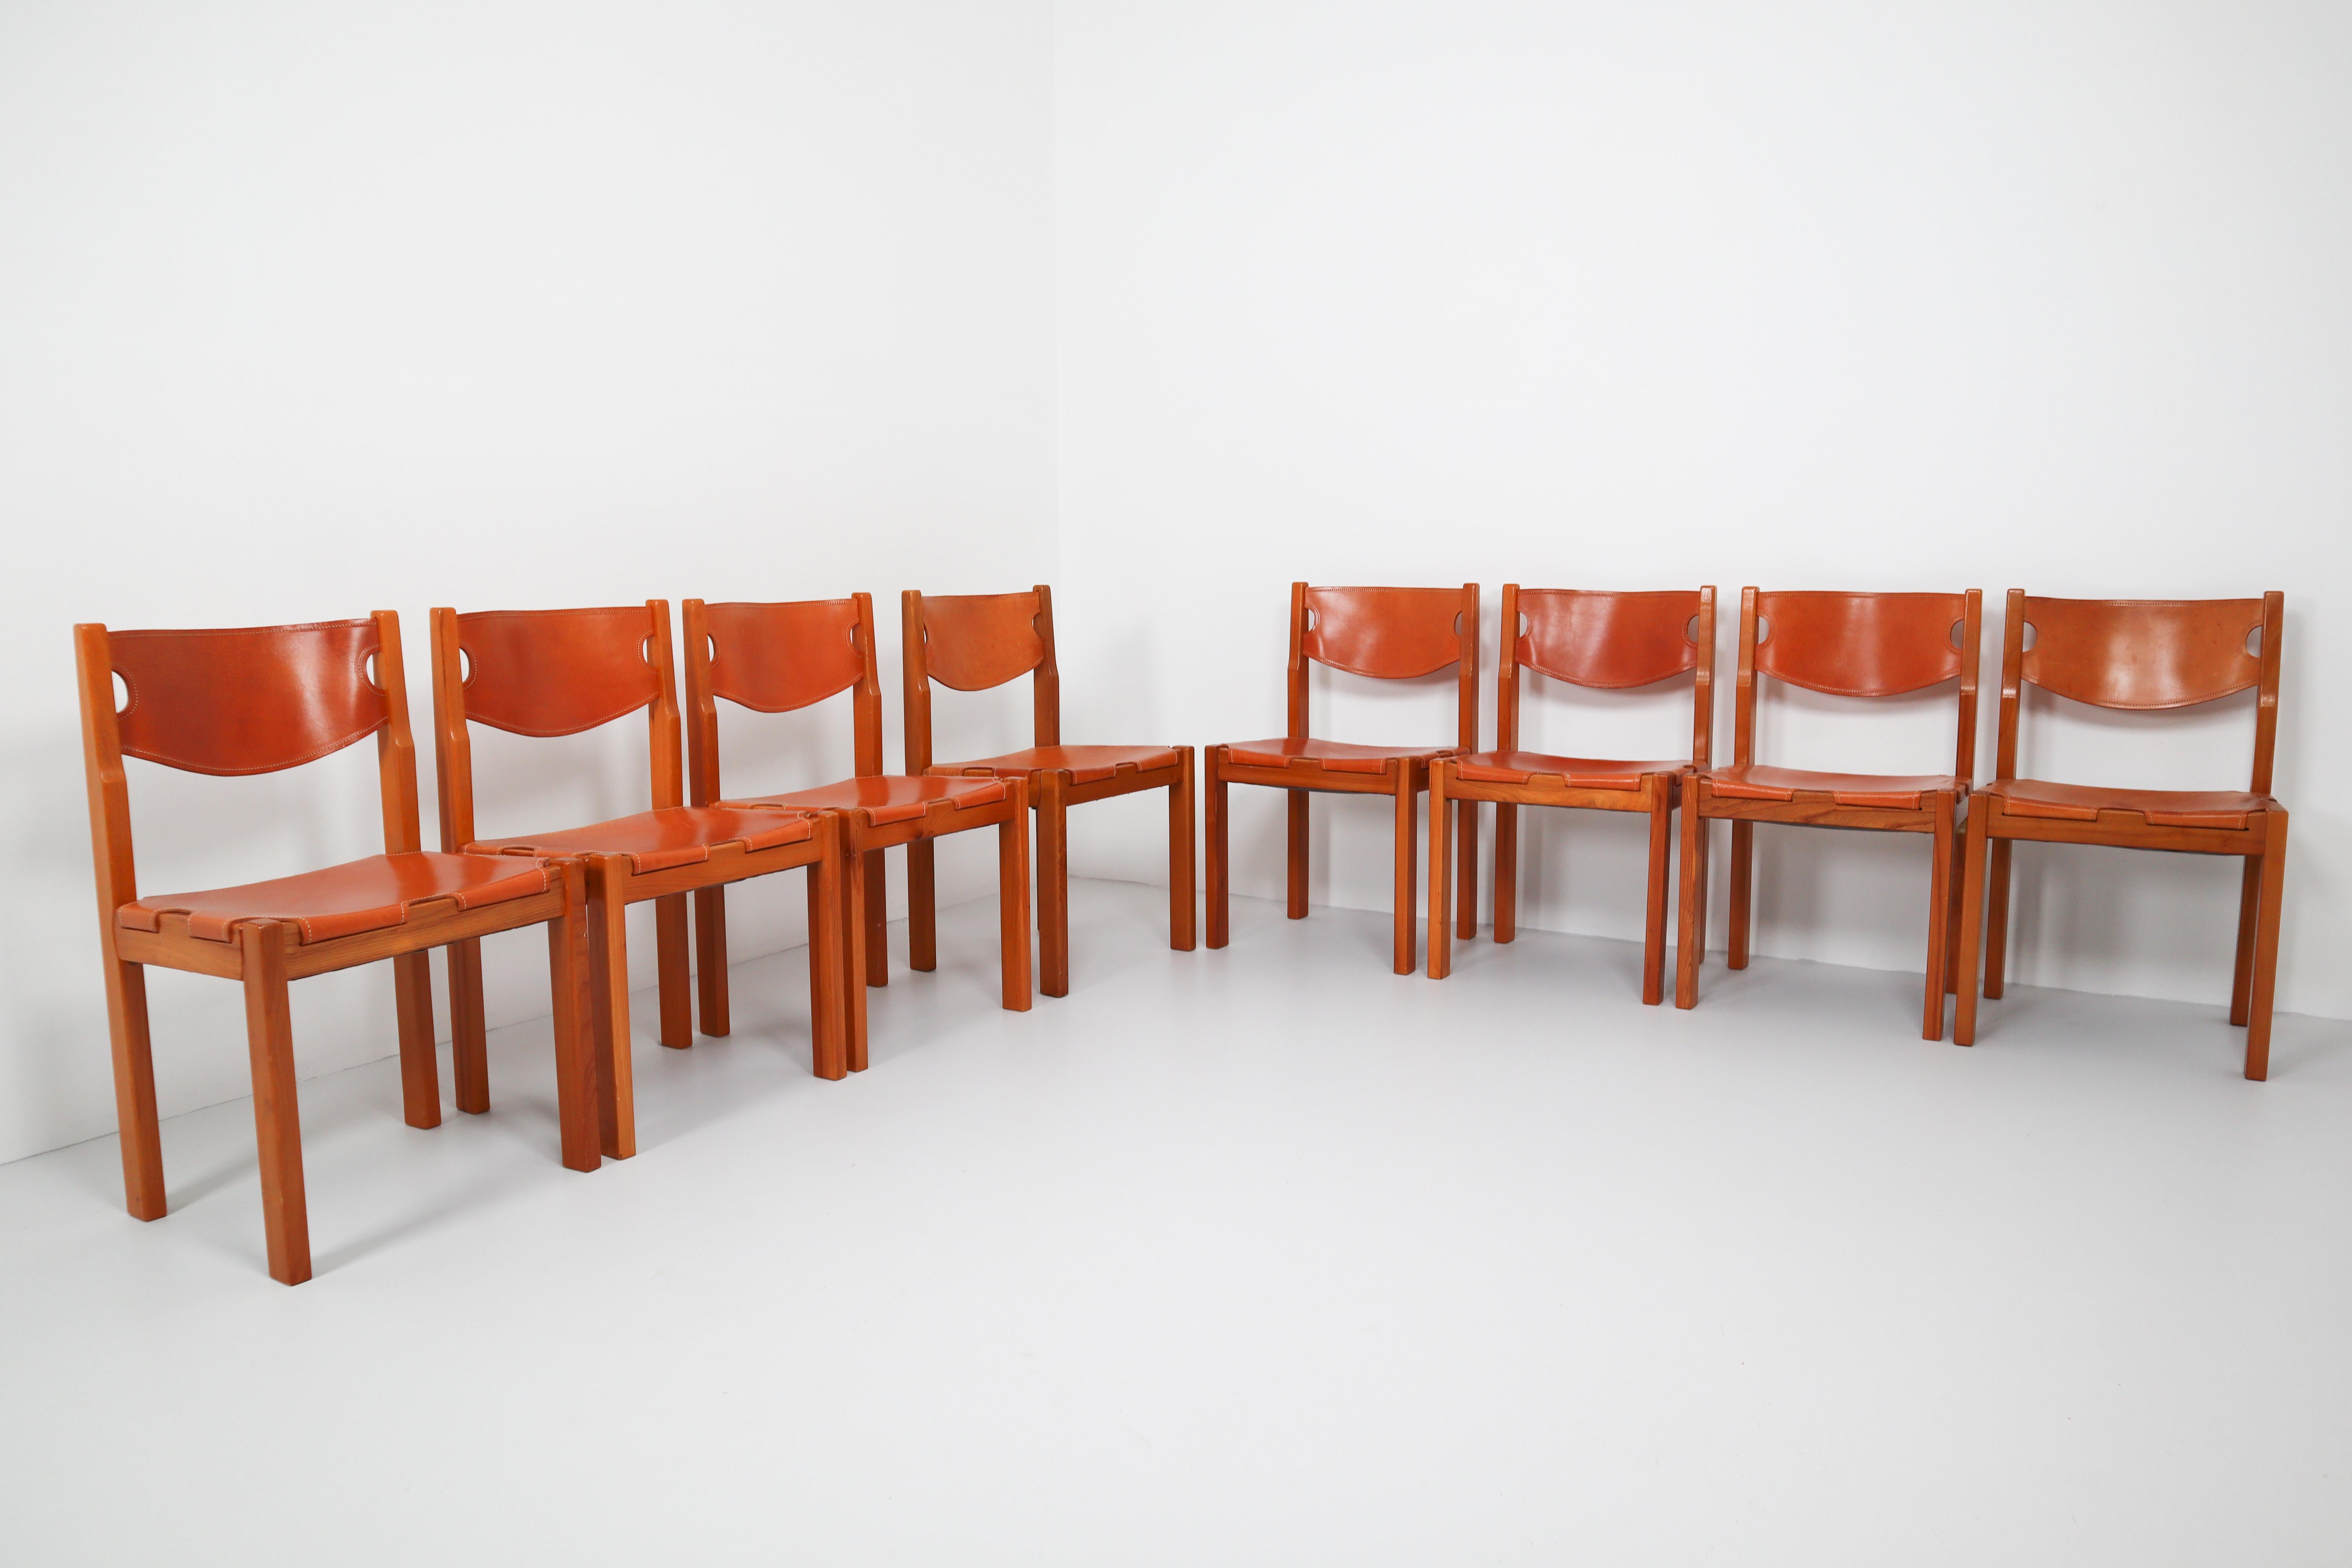 Set of eight cognac leather dining chairs in French pinewood. Cognac leather chairs from France, with a strong, architectural wooden frame. The cognac leather shows a very nice patina.